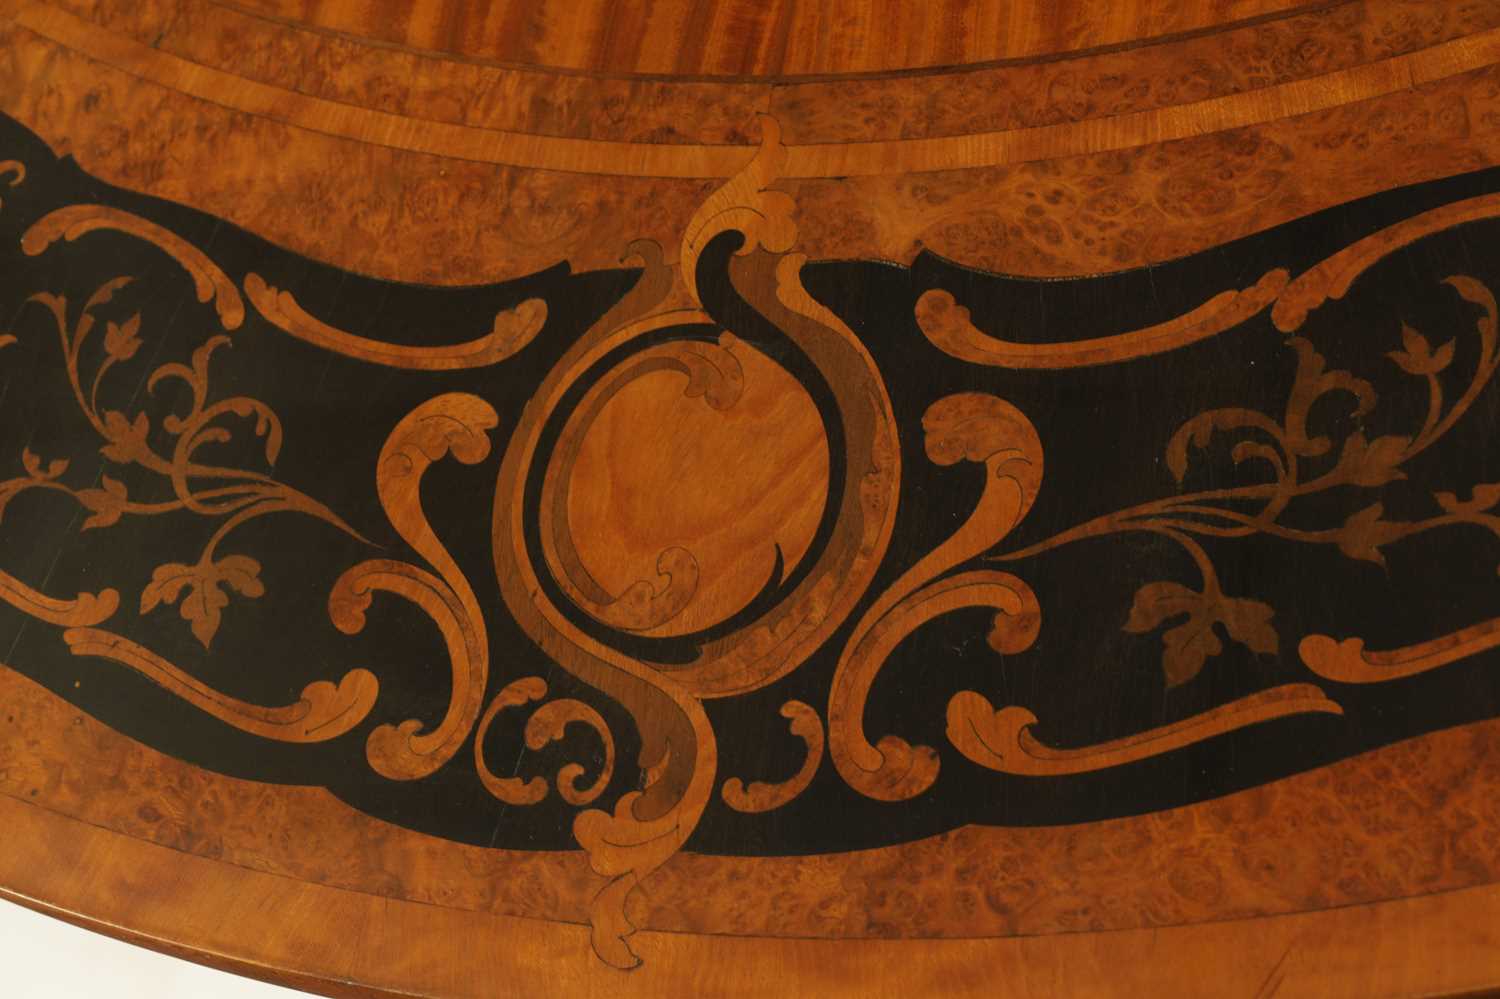 A FINE MID 19TH CENTURY FIGURED SATINWOOD MARQUETRY INLAID CENTRE TABLE - Image 7 of 8